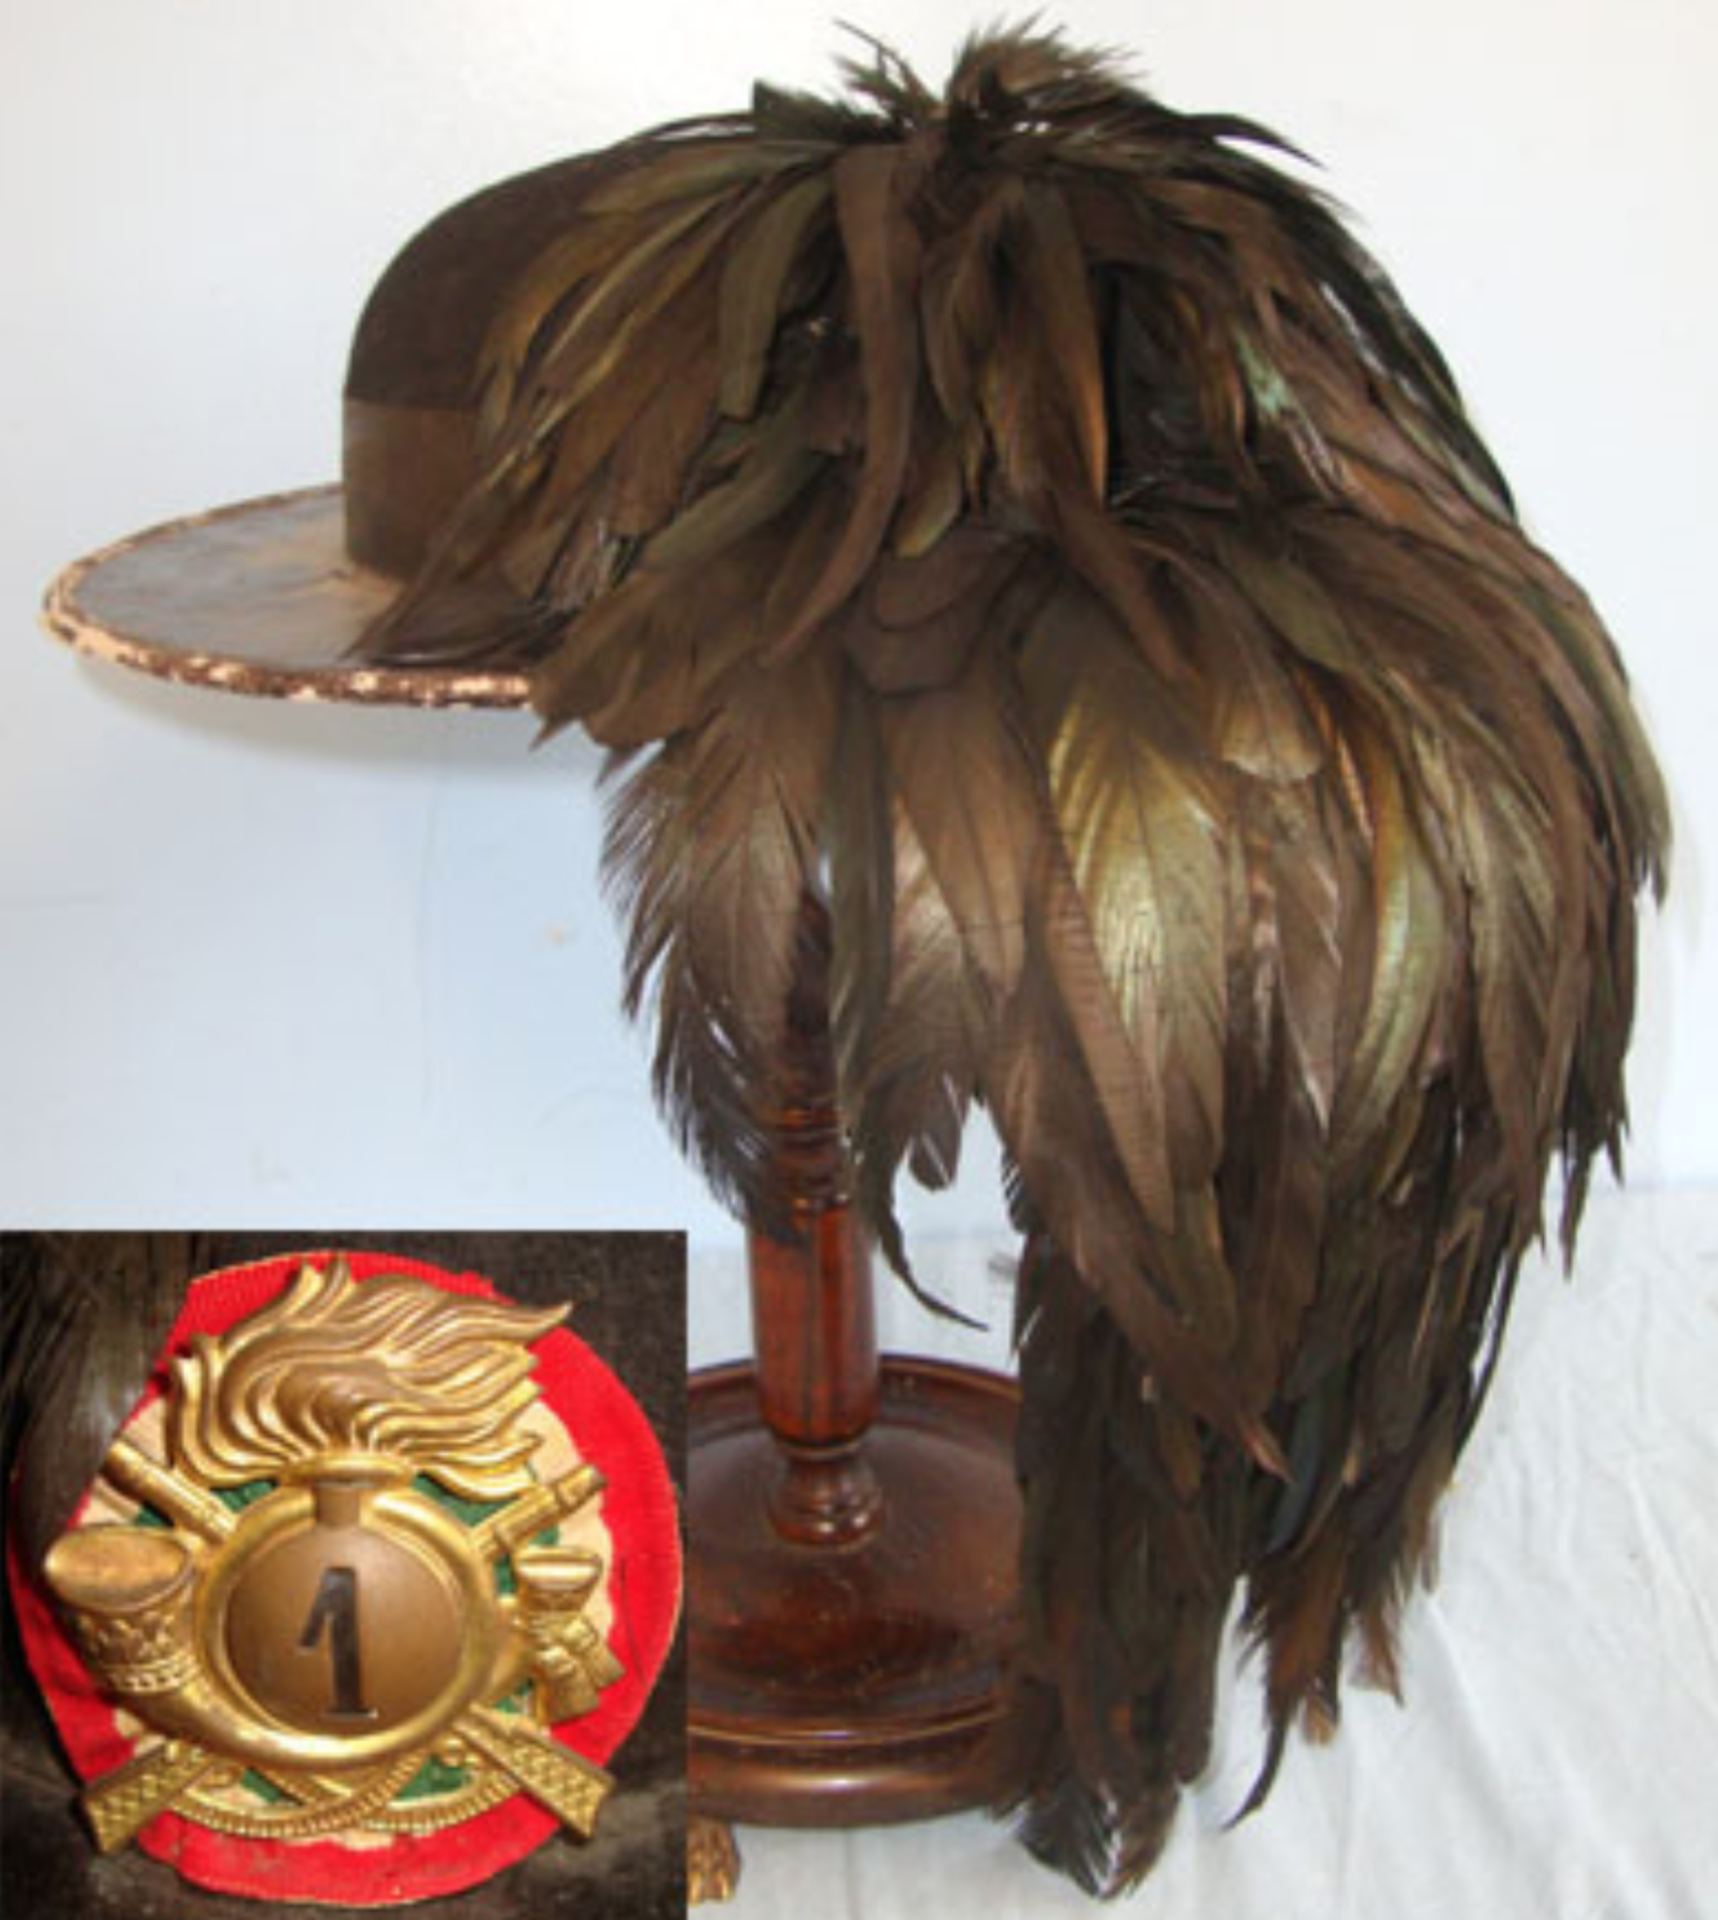 WW2 Era Bersaglieri Light Infantry Hat With 1st Bersaglieri Plate & Black Capercaillie Feather - Image 2 of 3